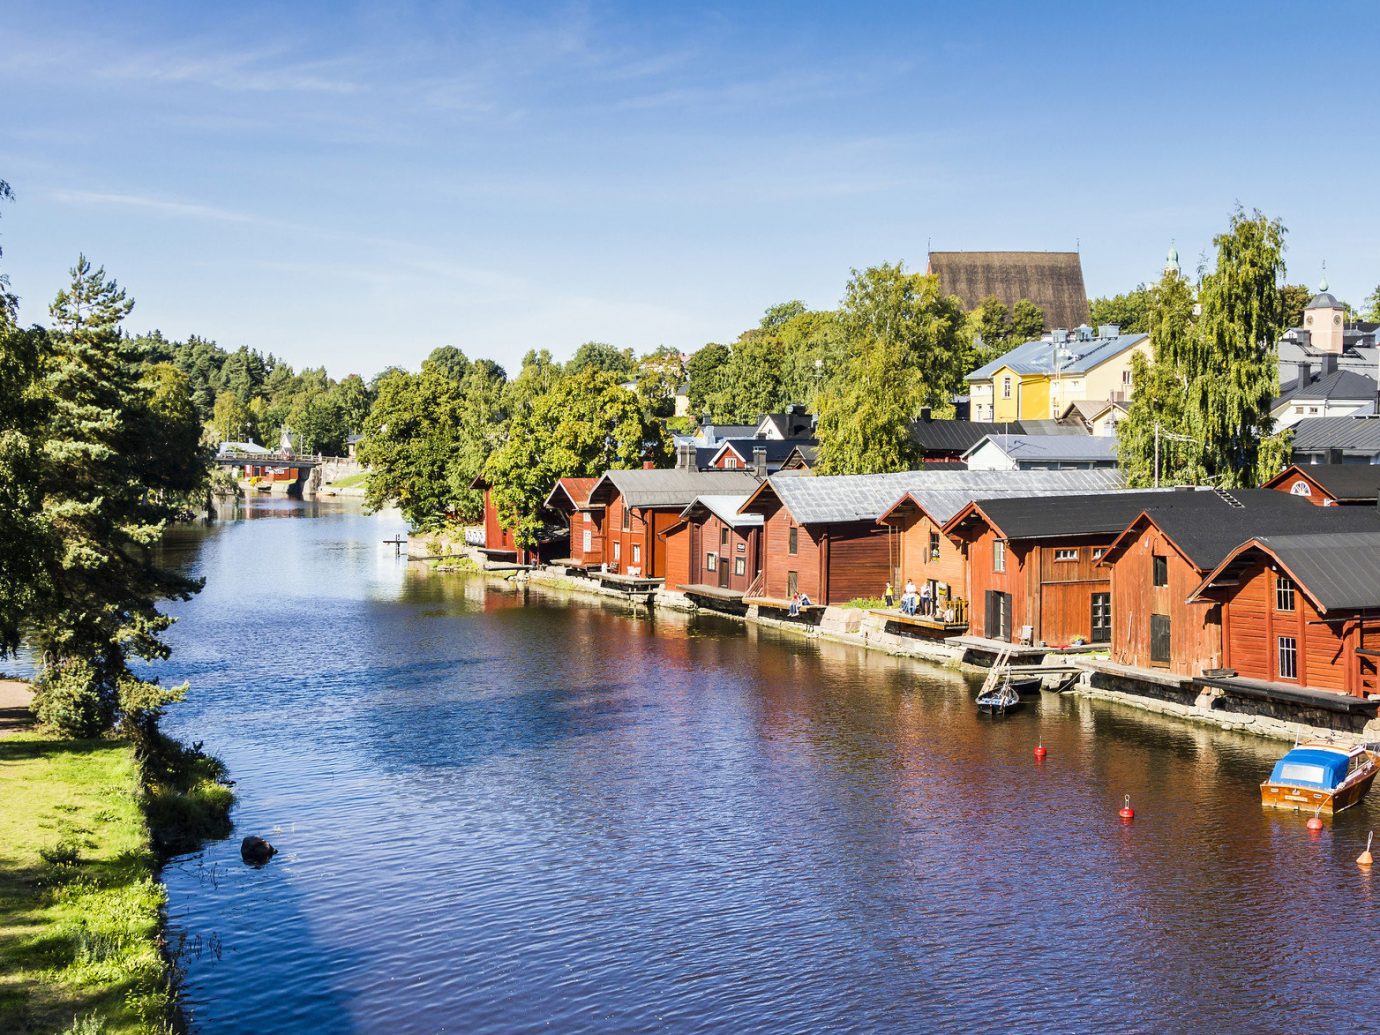 City dock Finland houses path River trees Trip Ideas water outdoor tree sky landform body of water Canal Town waterway house reflection Lake pond several